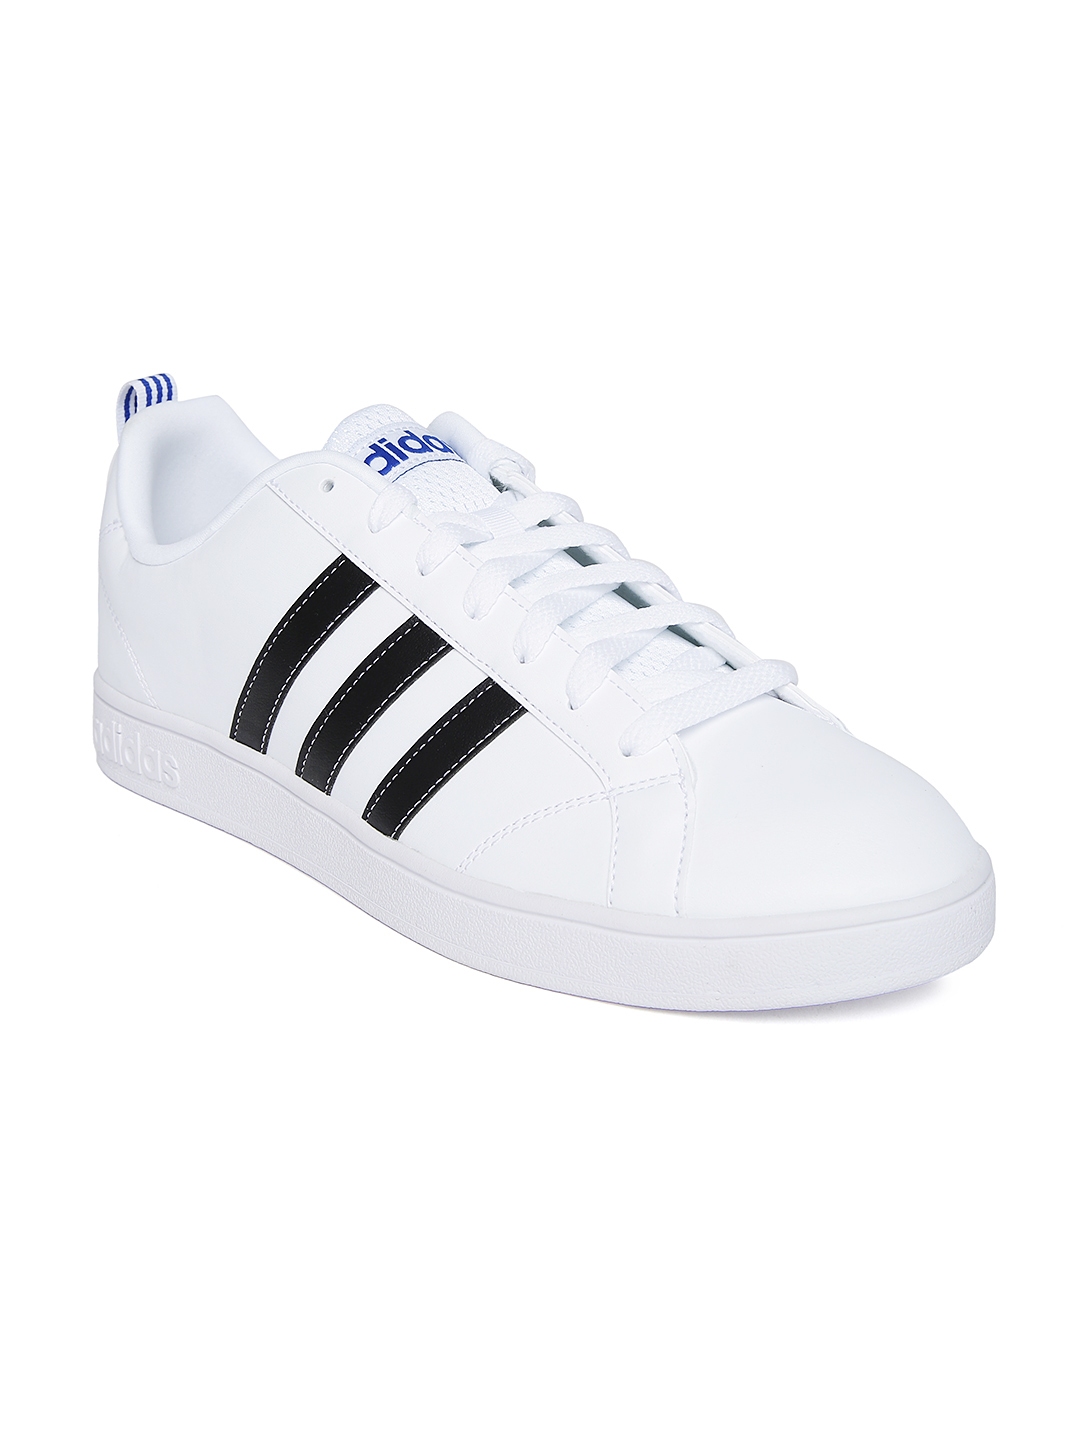 Buy ADIDAS NEO Men White Advantage VS Casual Shoes - Casual Shoes for ...